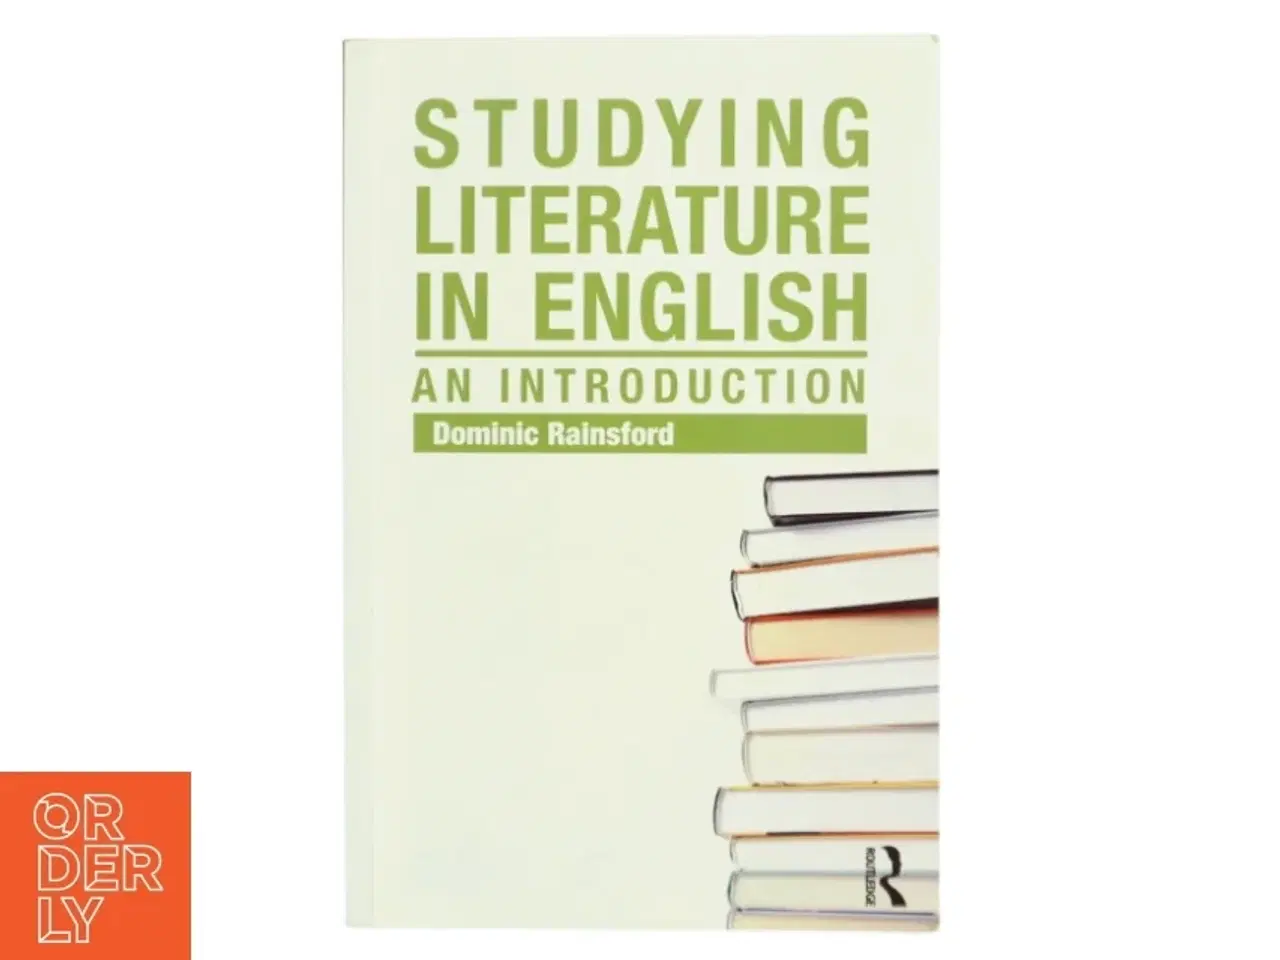 Billede 1 - Studying literature in English : an introduction af Dominic Rainsford (Bog)